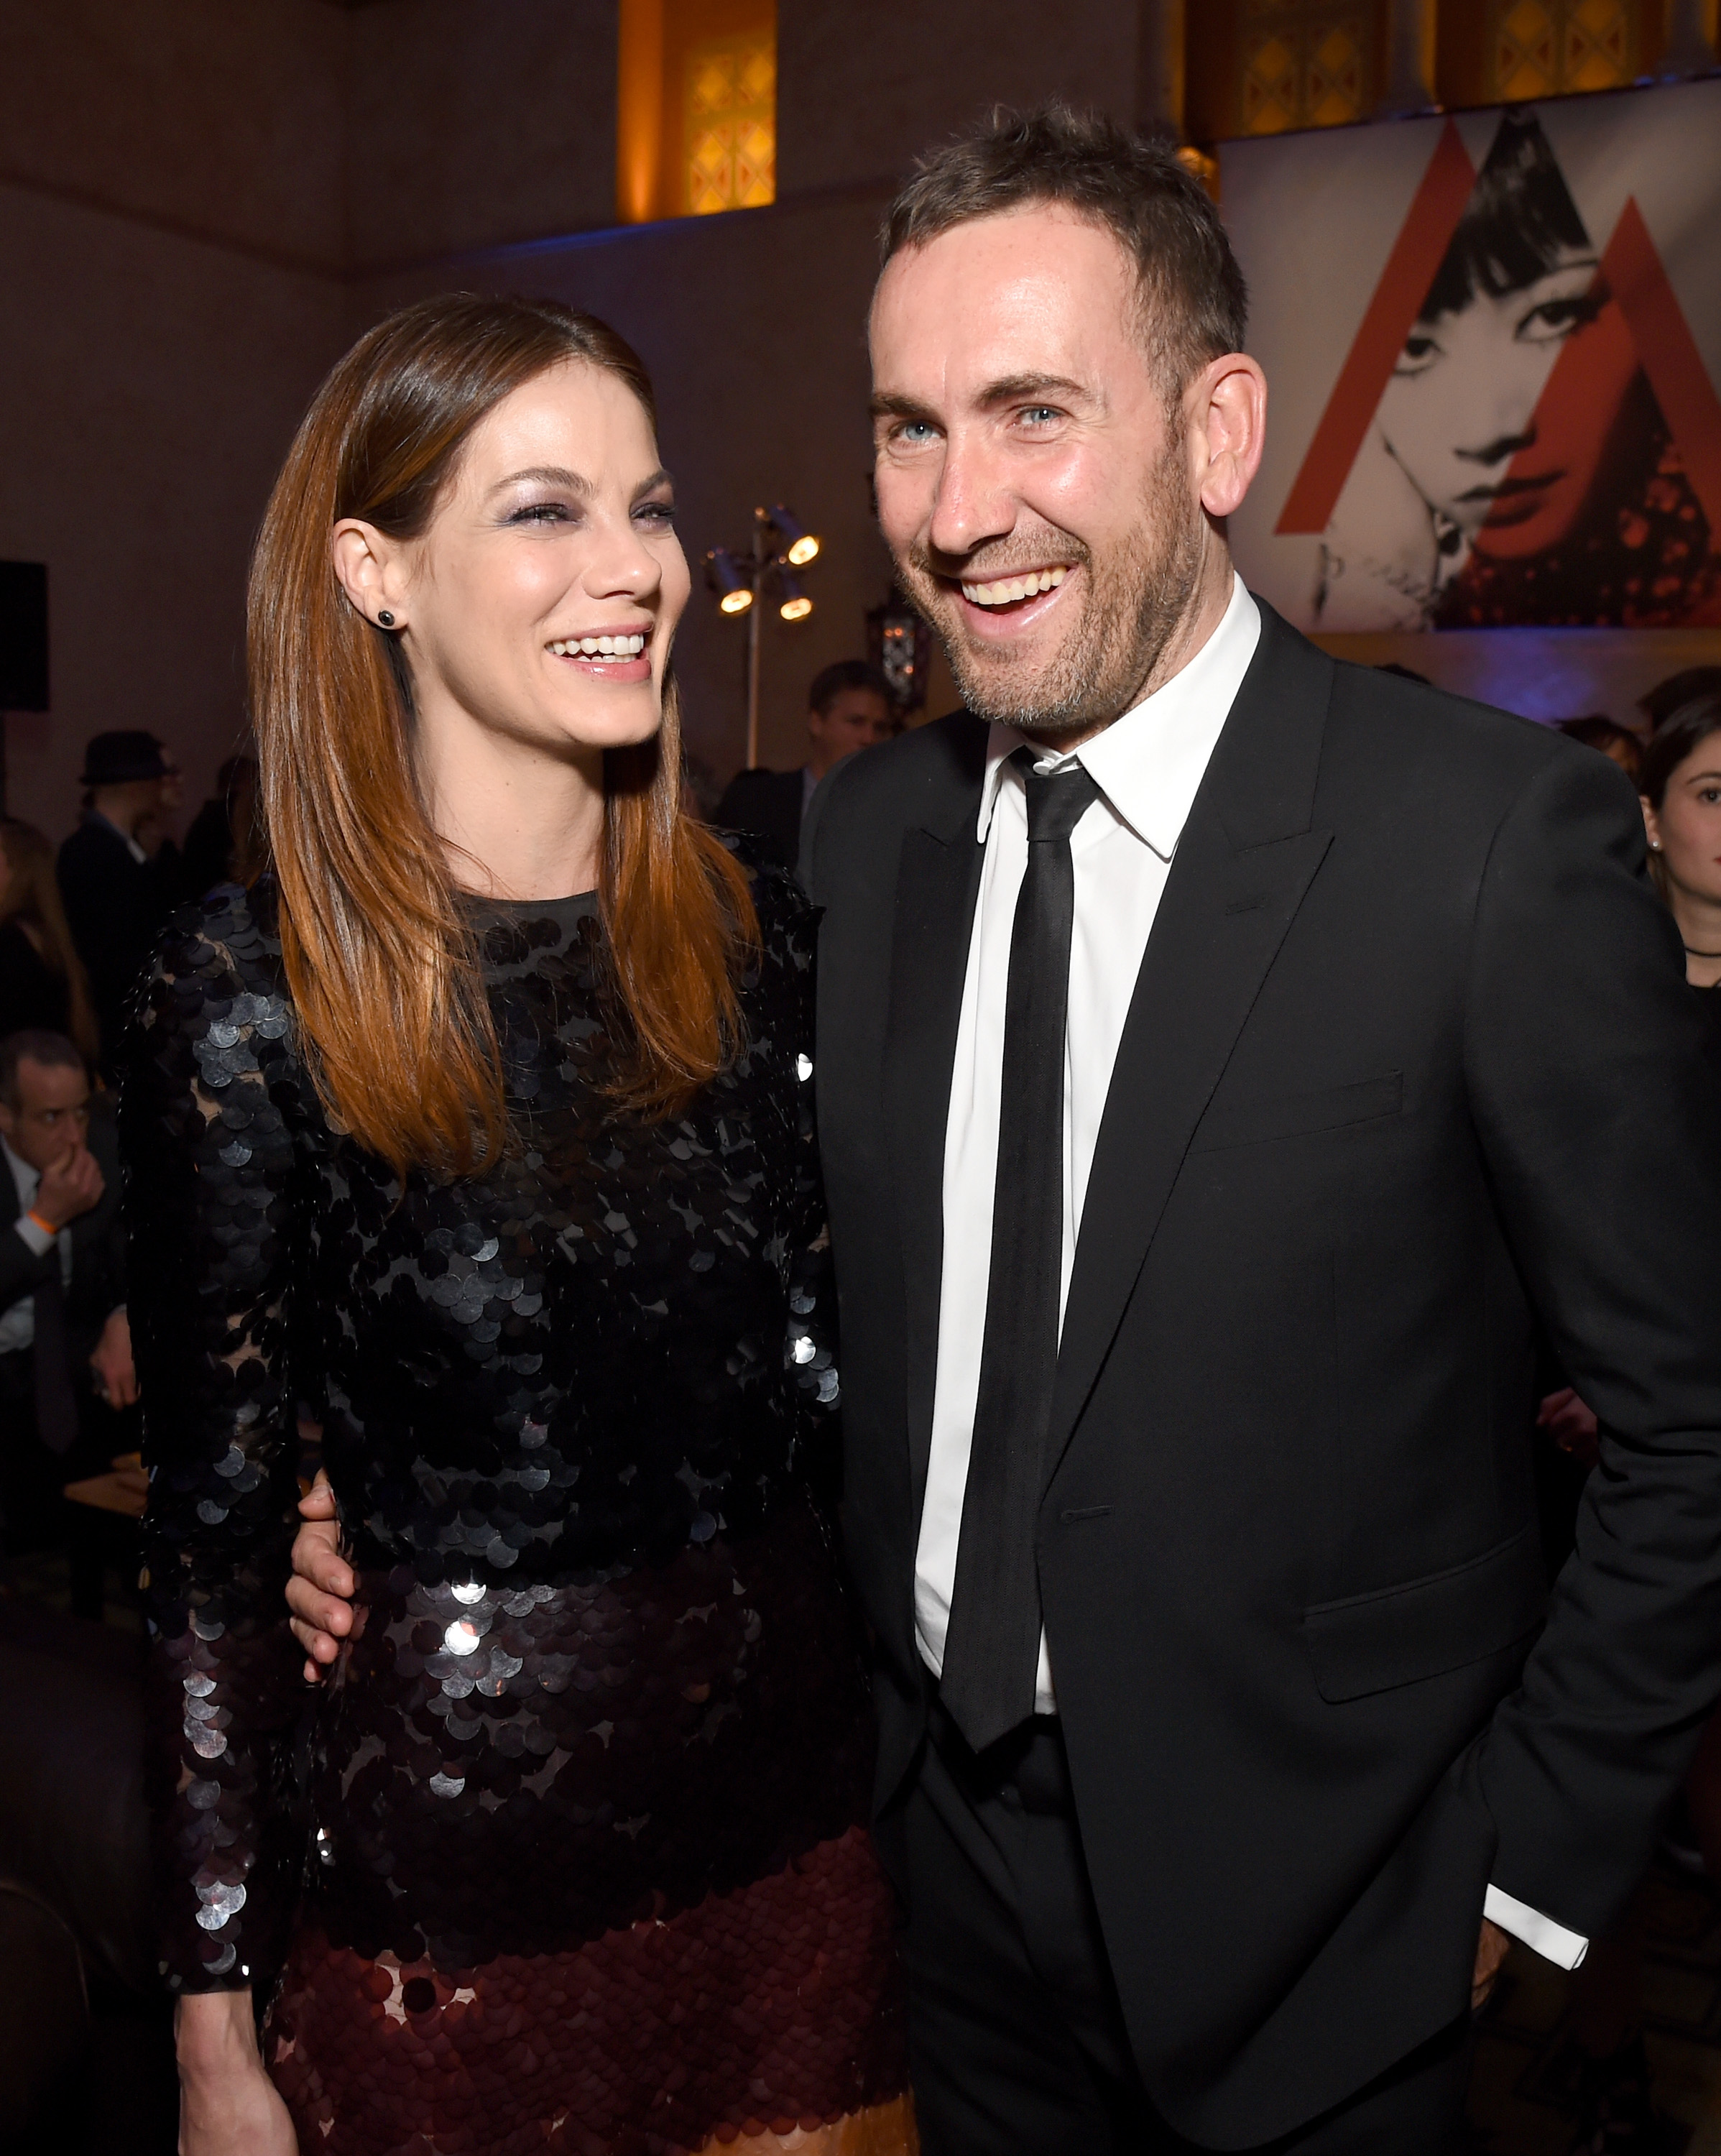 Michelle Monaghan and Peter White at the after party for the premiere of "Patriots Day" at AFI Fest on November 17, 2016, in Hollywood, California. | Source: Getty Images